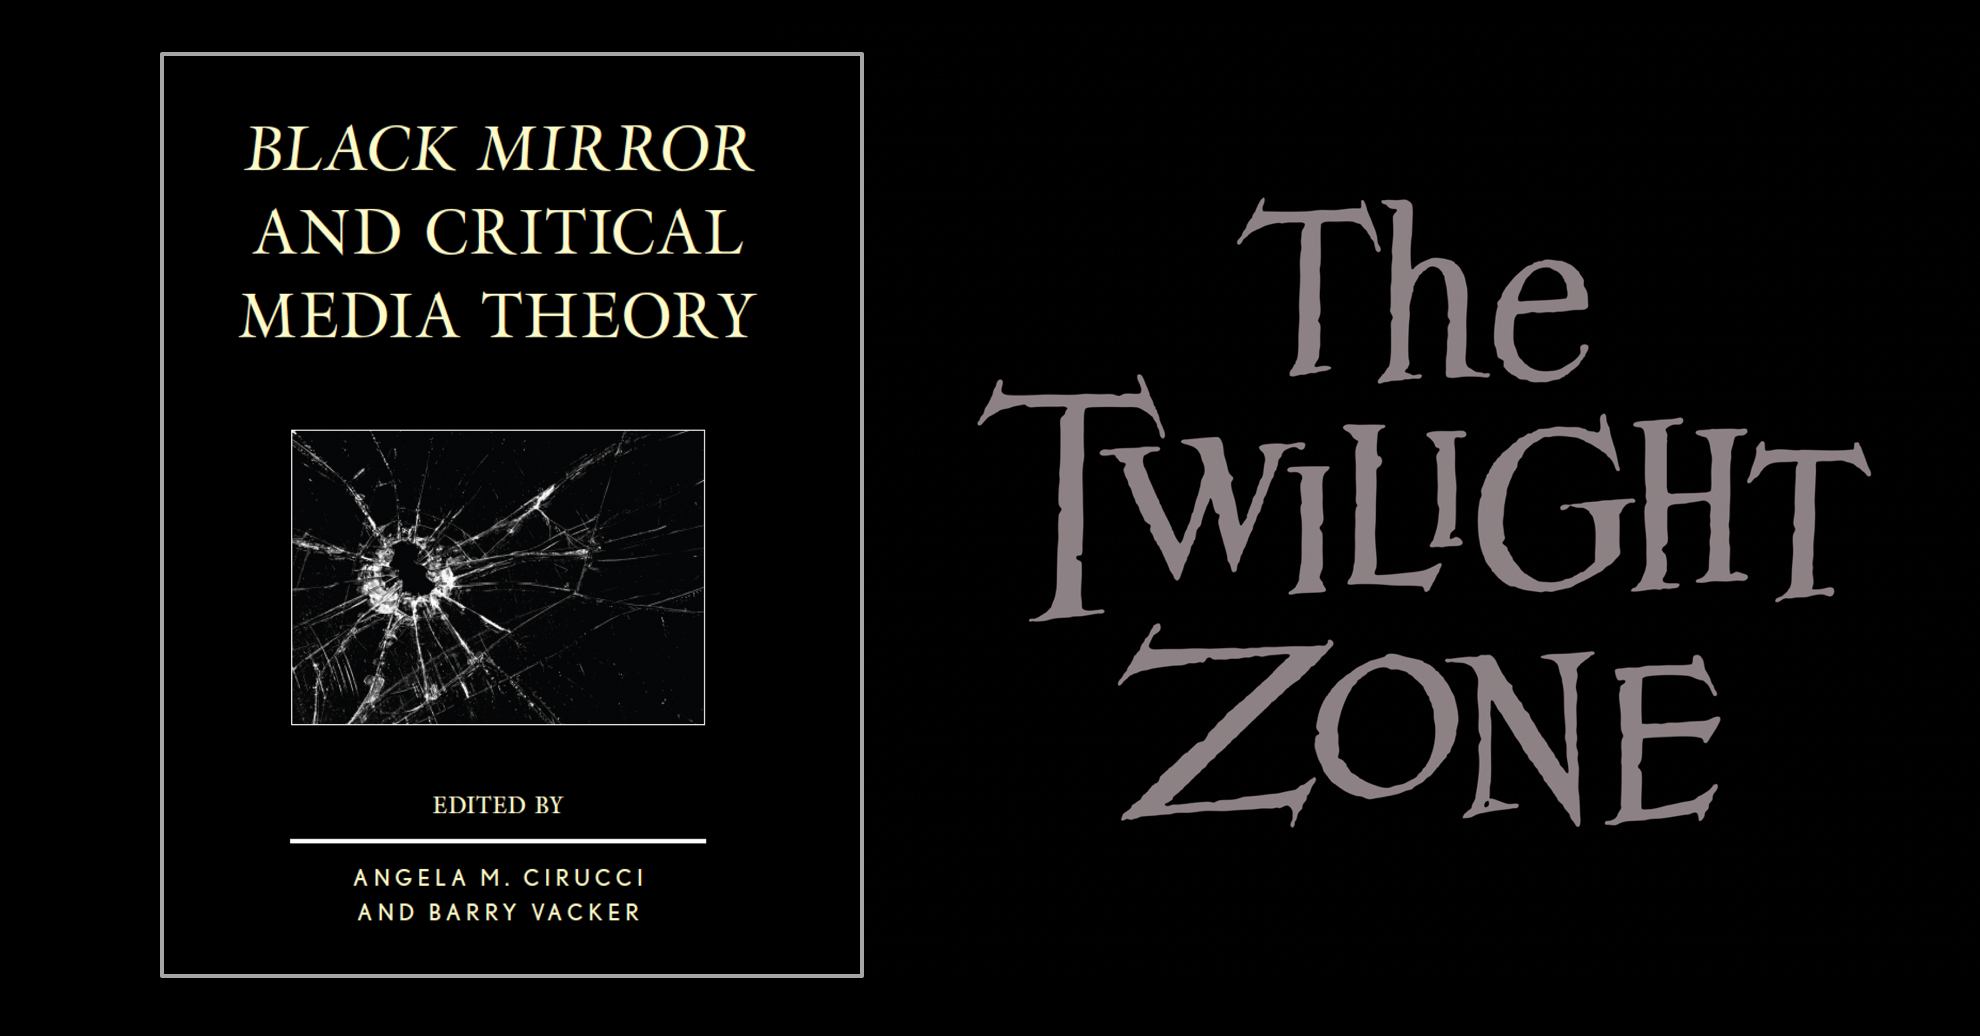 Download Black Mirror The Twilight Zone Of The 21st Century By Barry Vacker Medium SVG Cut Files